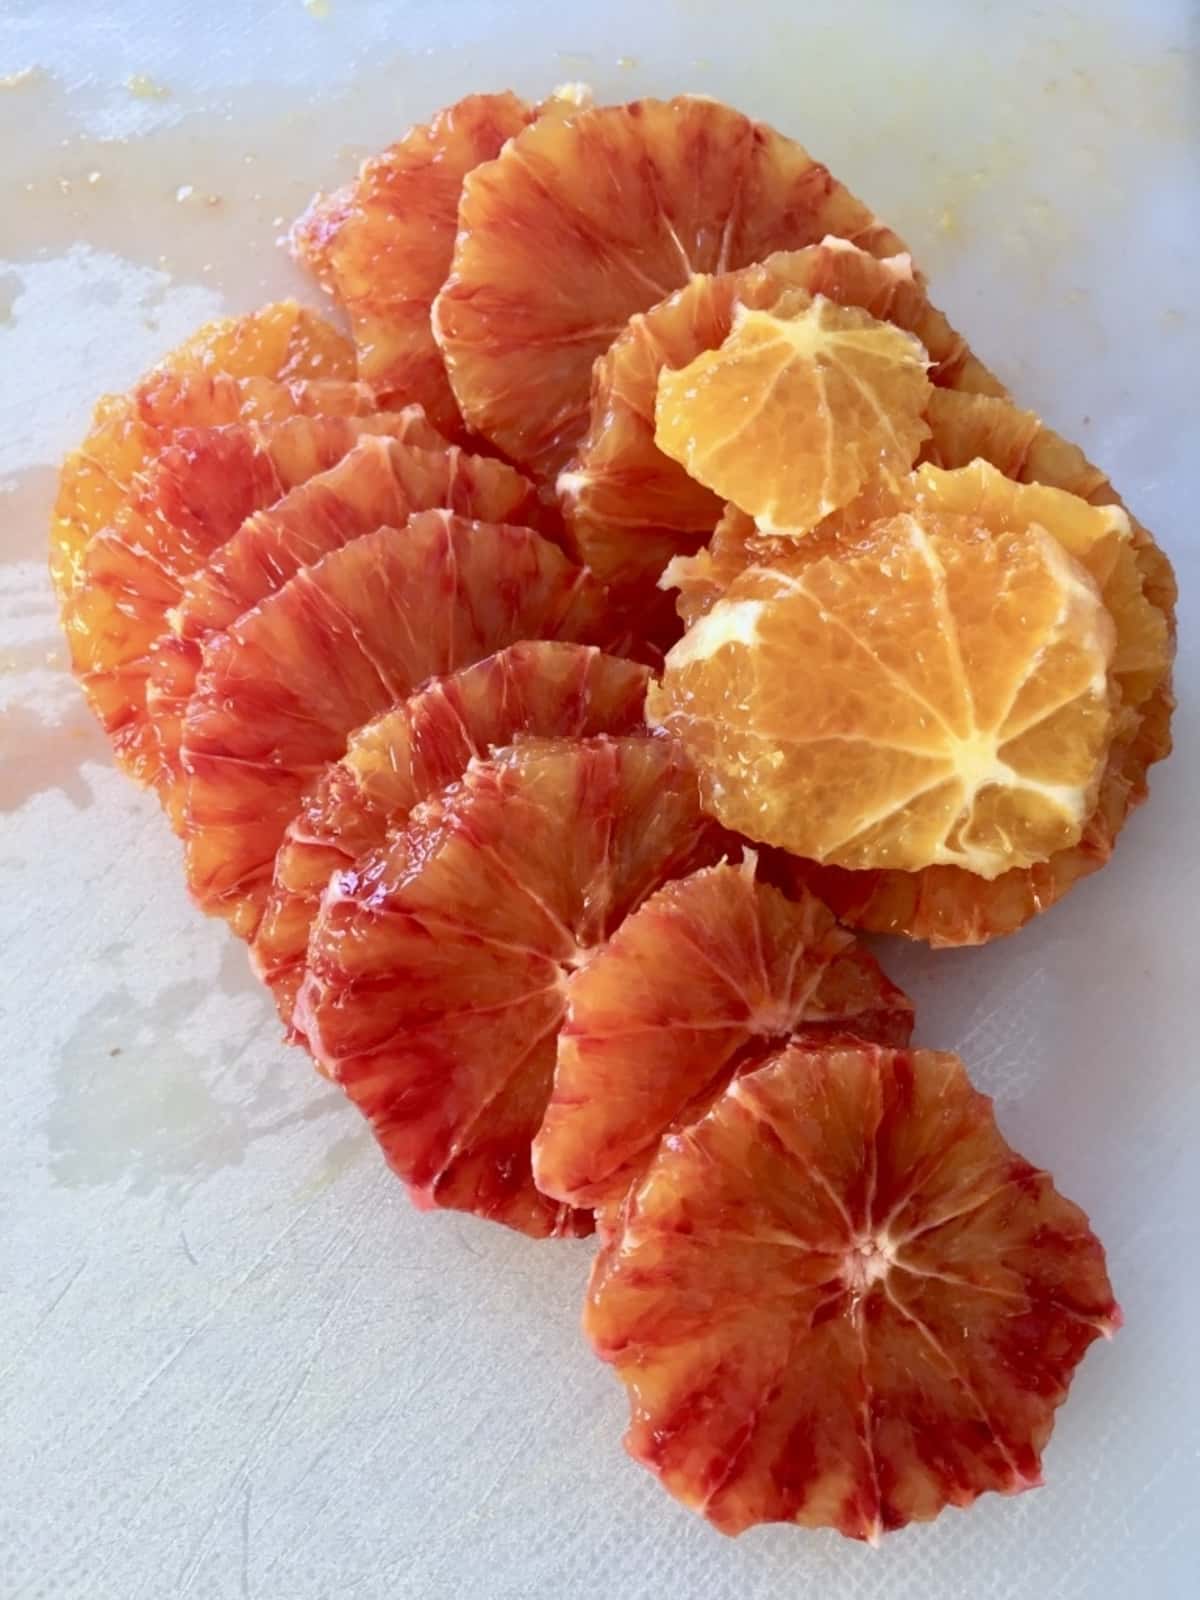 Slices of peeled blood oranges on a board.